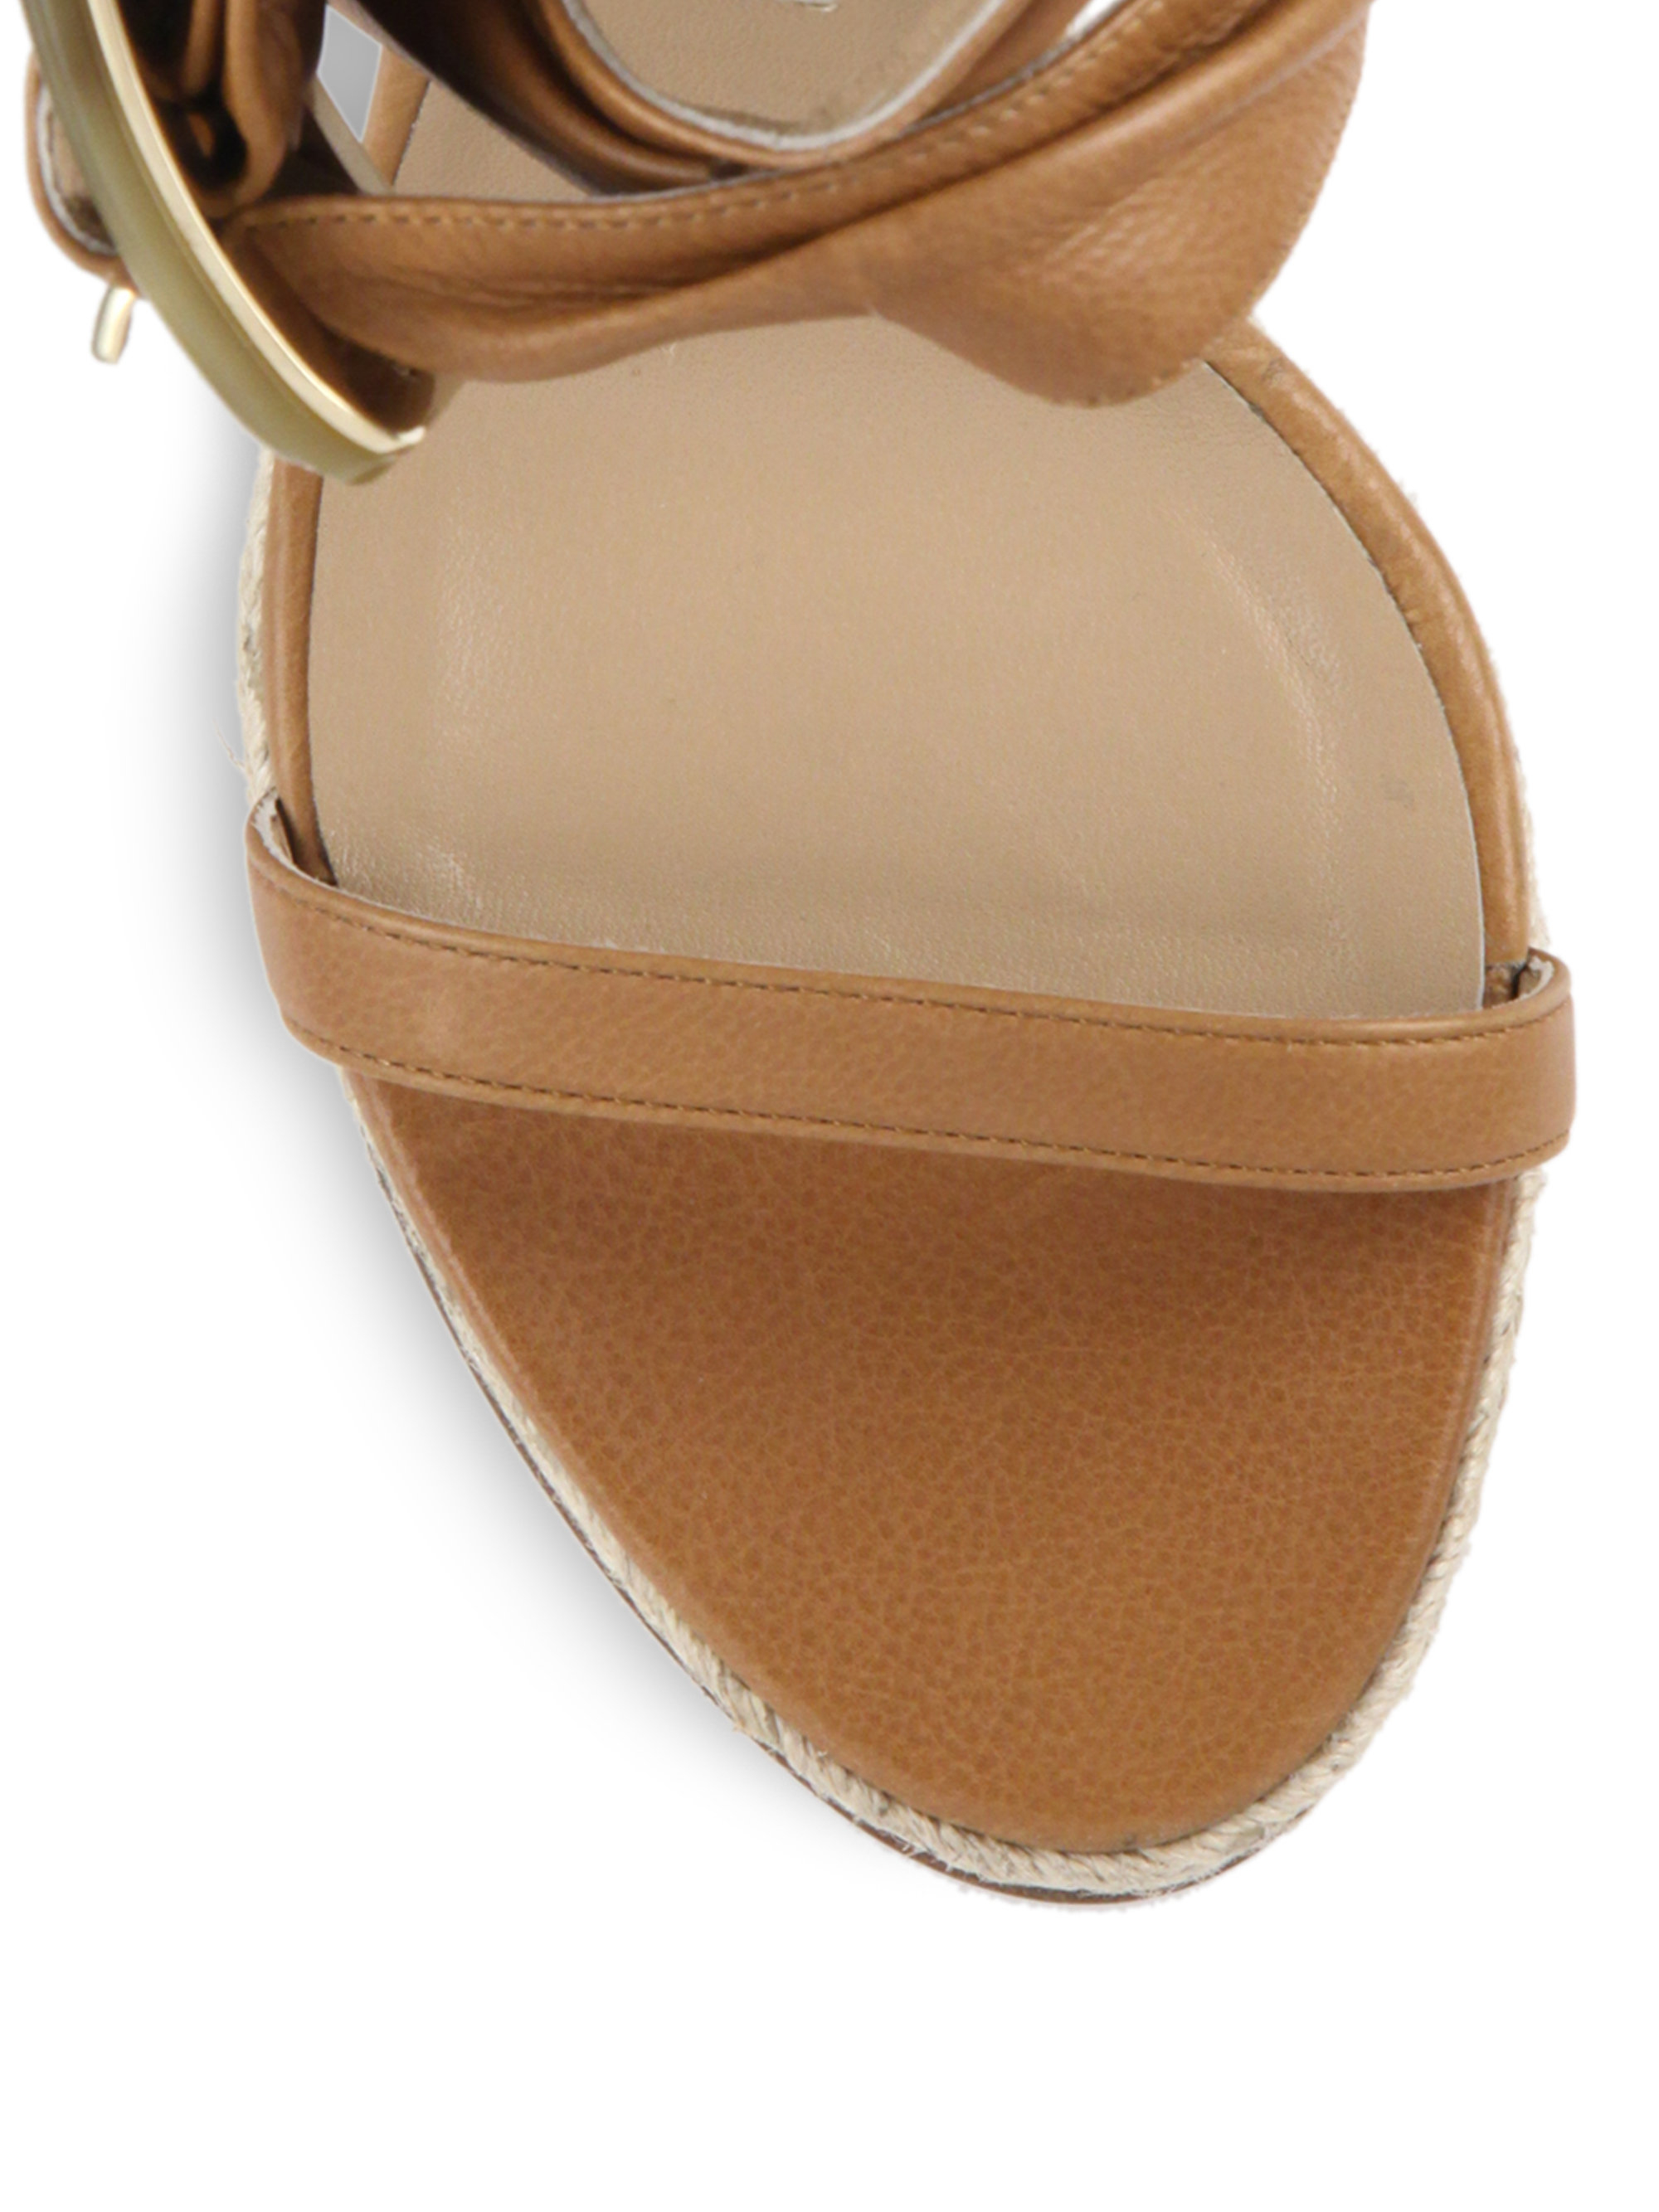 Burberry Catsbrook Leather Espadrille Wedge Sandals in Camel (Brown) - Lyst